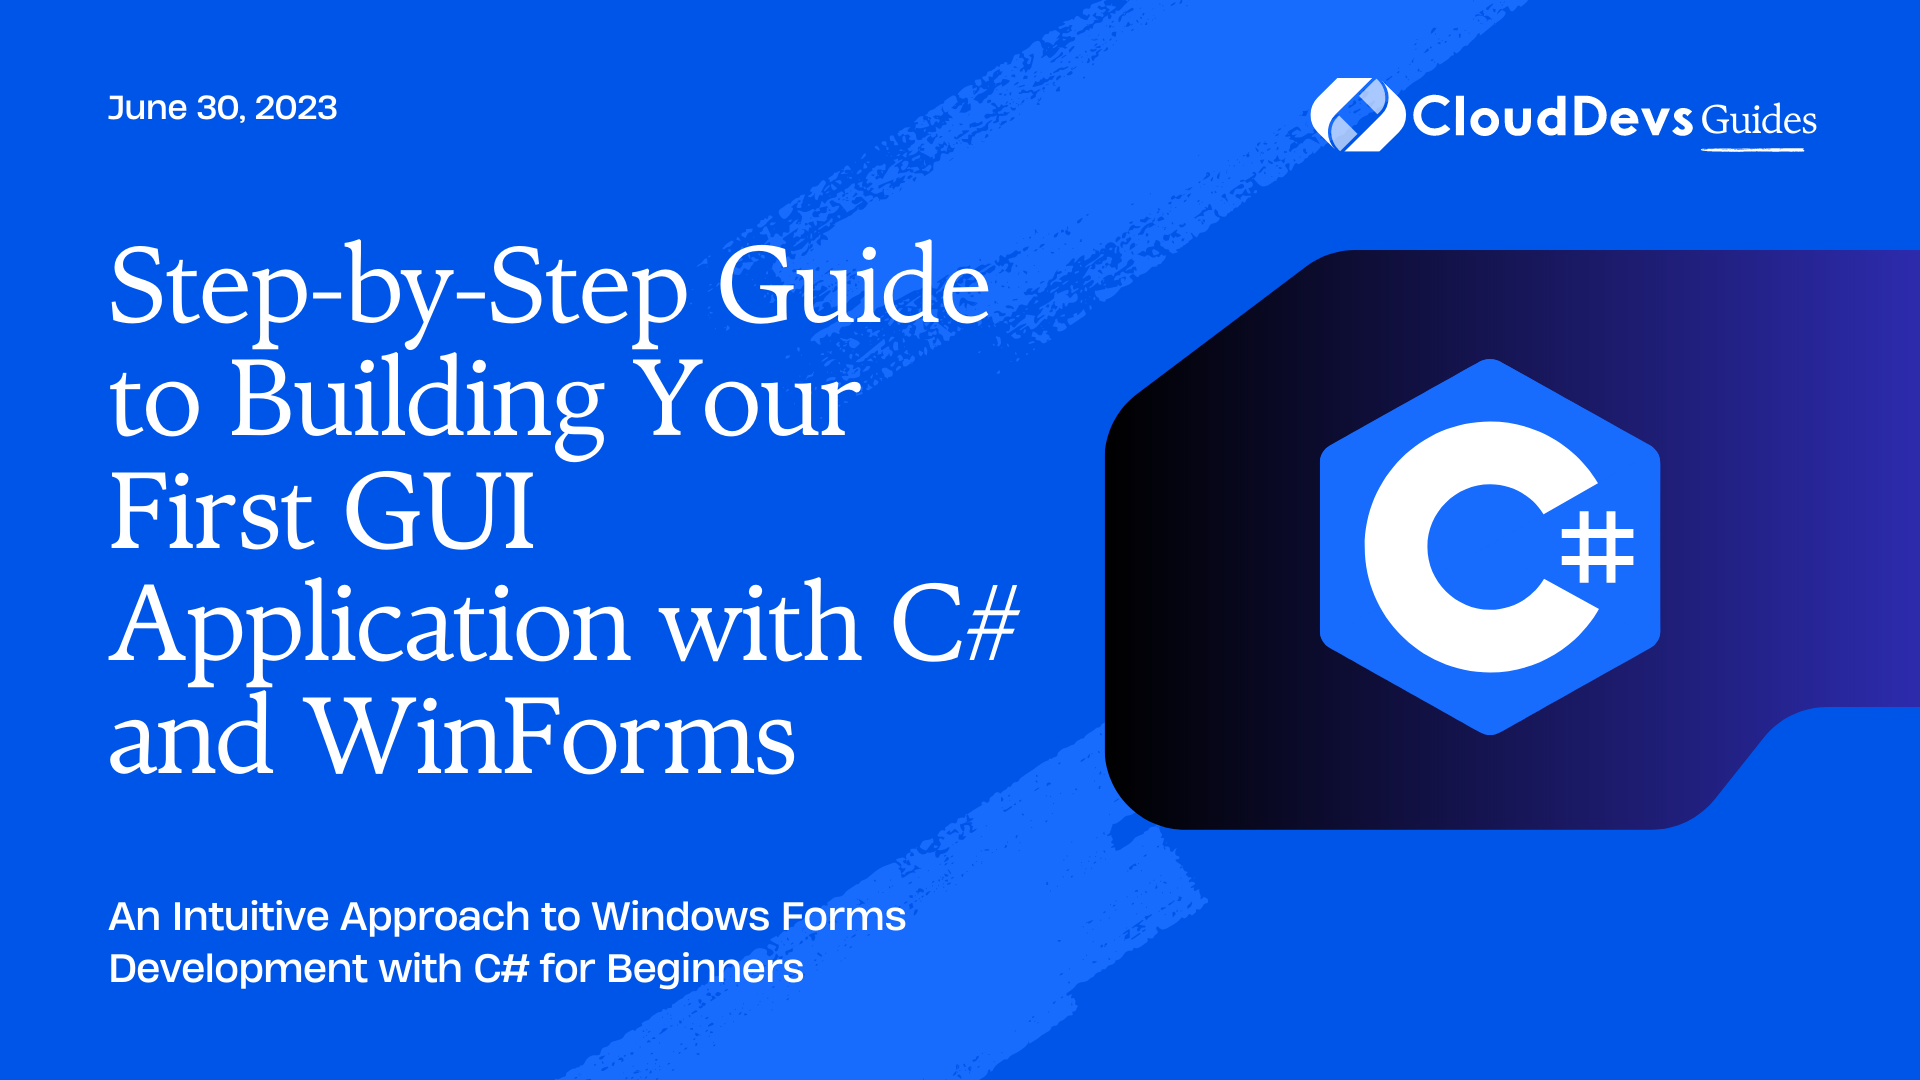 Step-by-Step Guide to Building Your First GUI Application with C# and WinForms